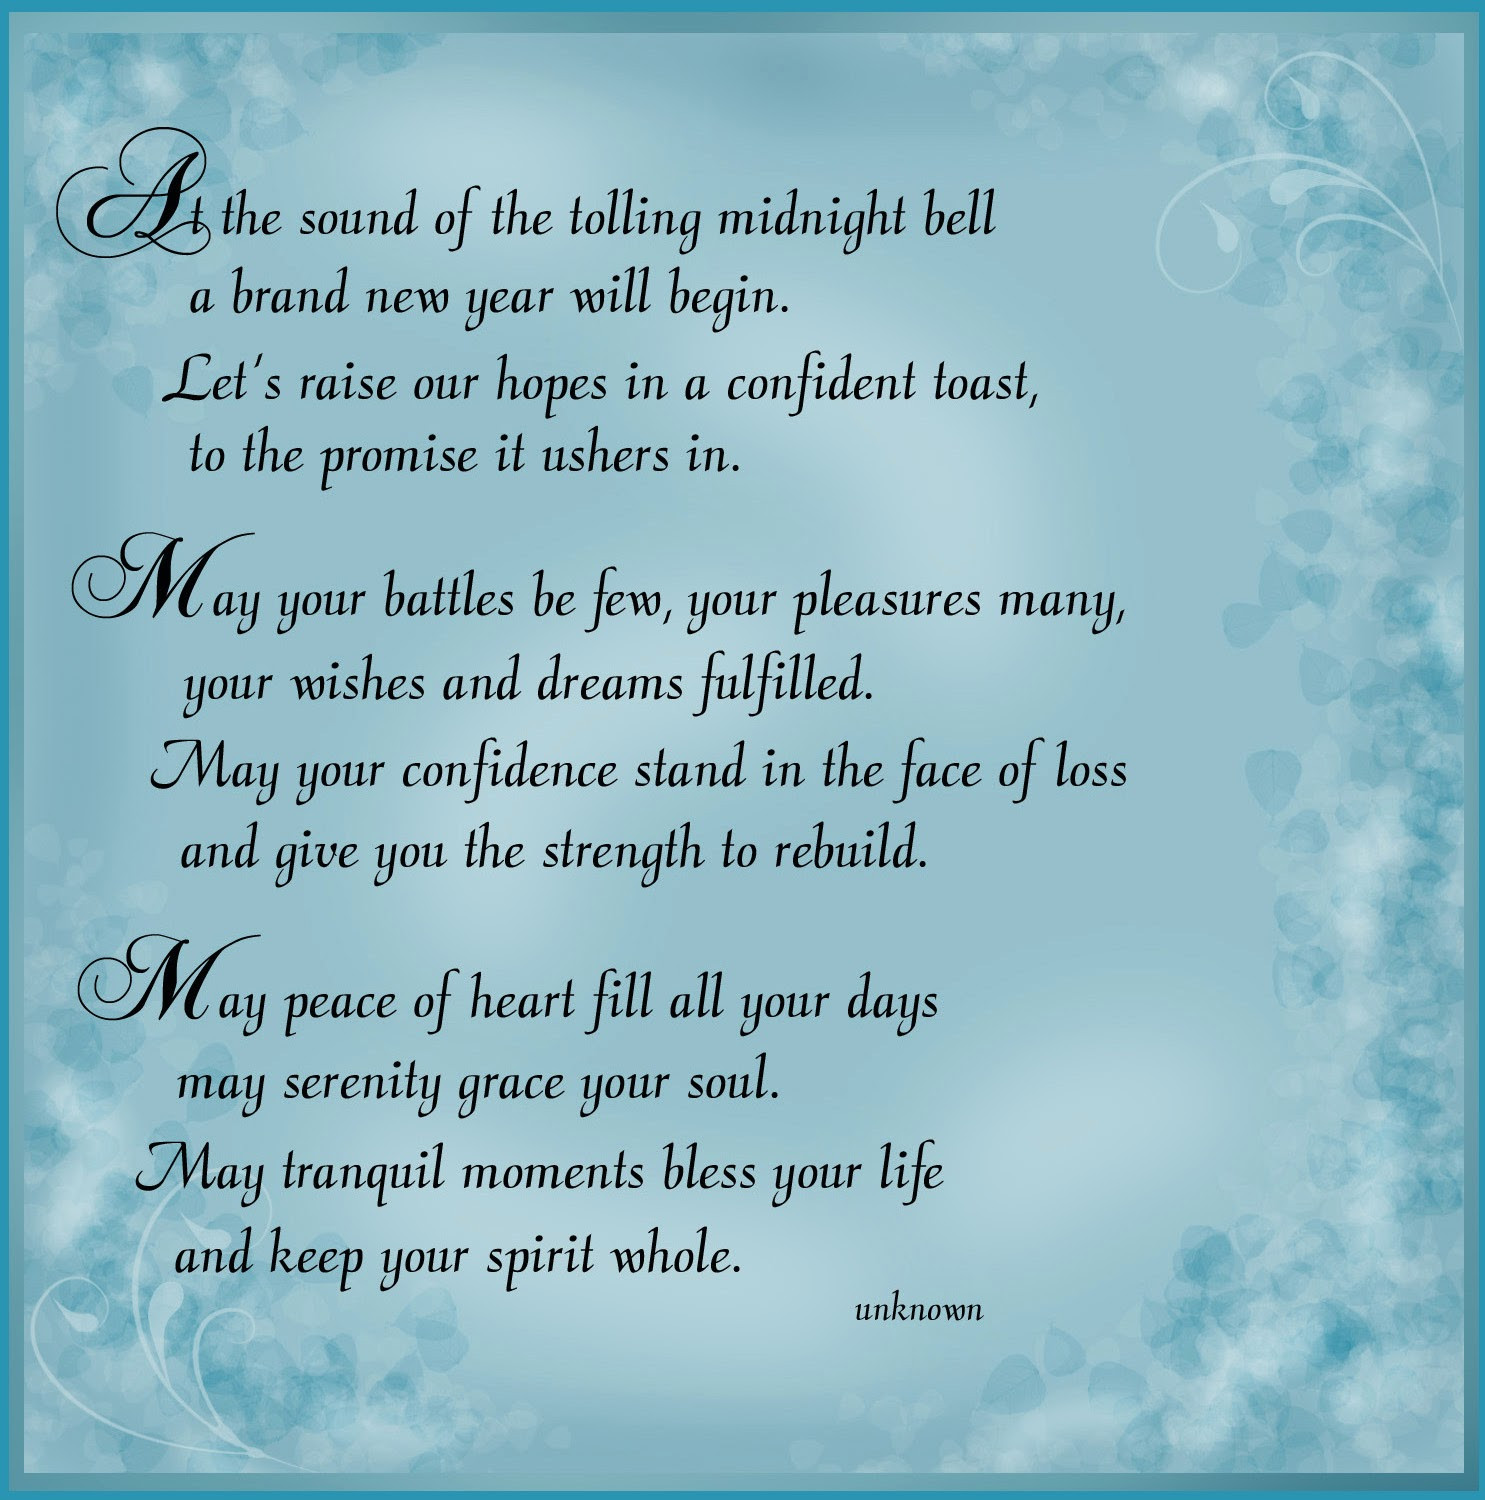 New Year Poems And Quotes
 New Year 2014 Wishes Poems Poetry Collection Happy New